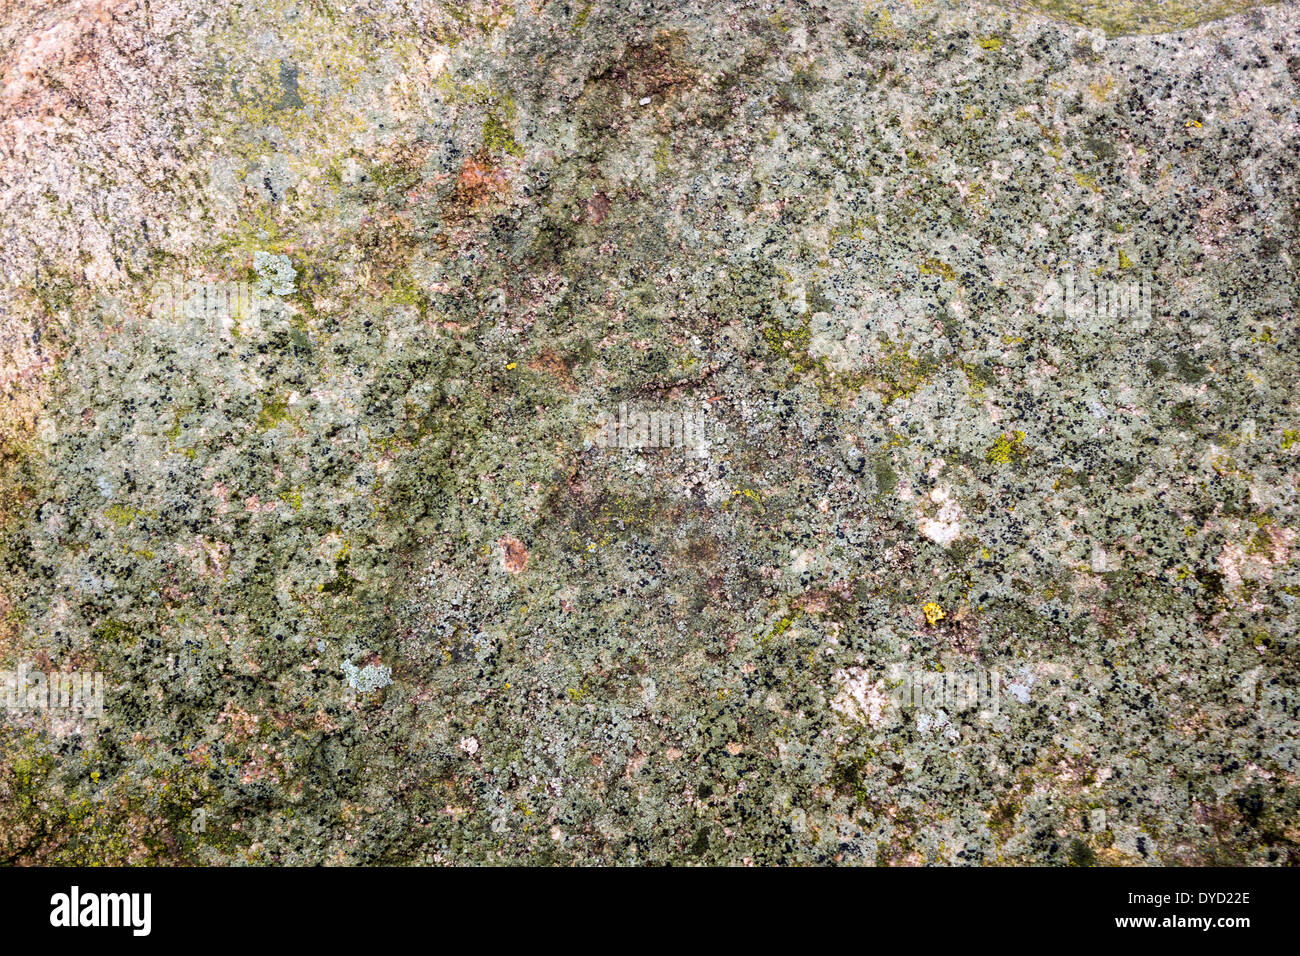 Moss growing on the top of a large rock or boulder. Stock Photo